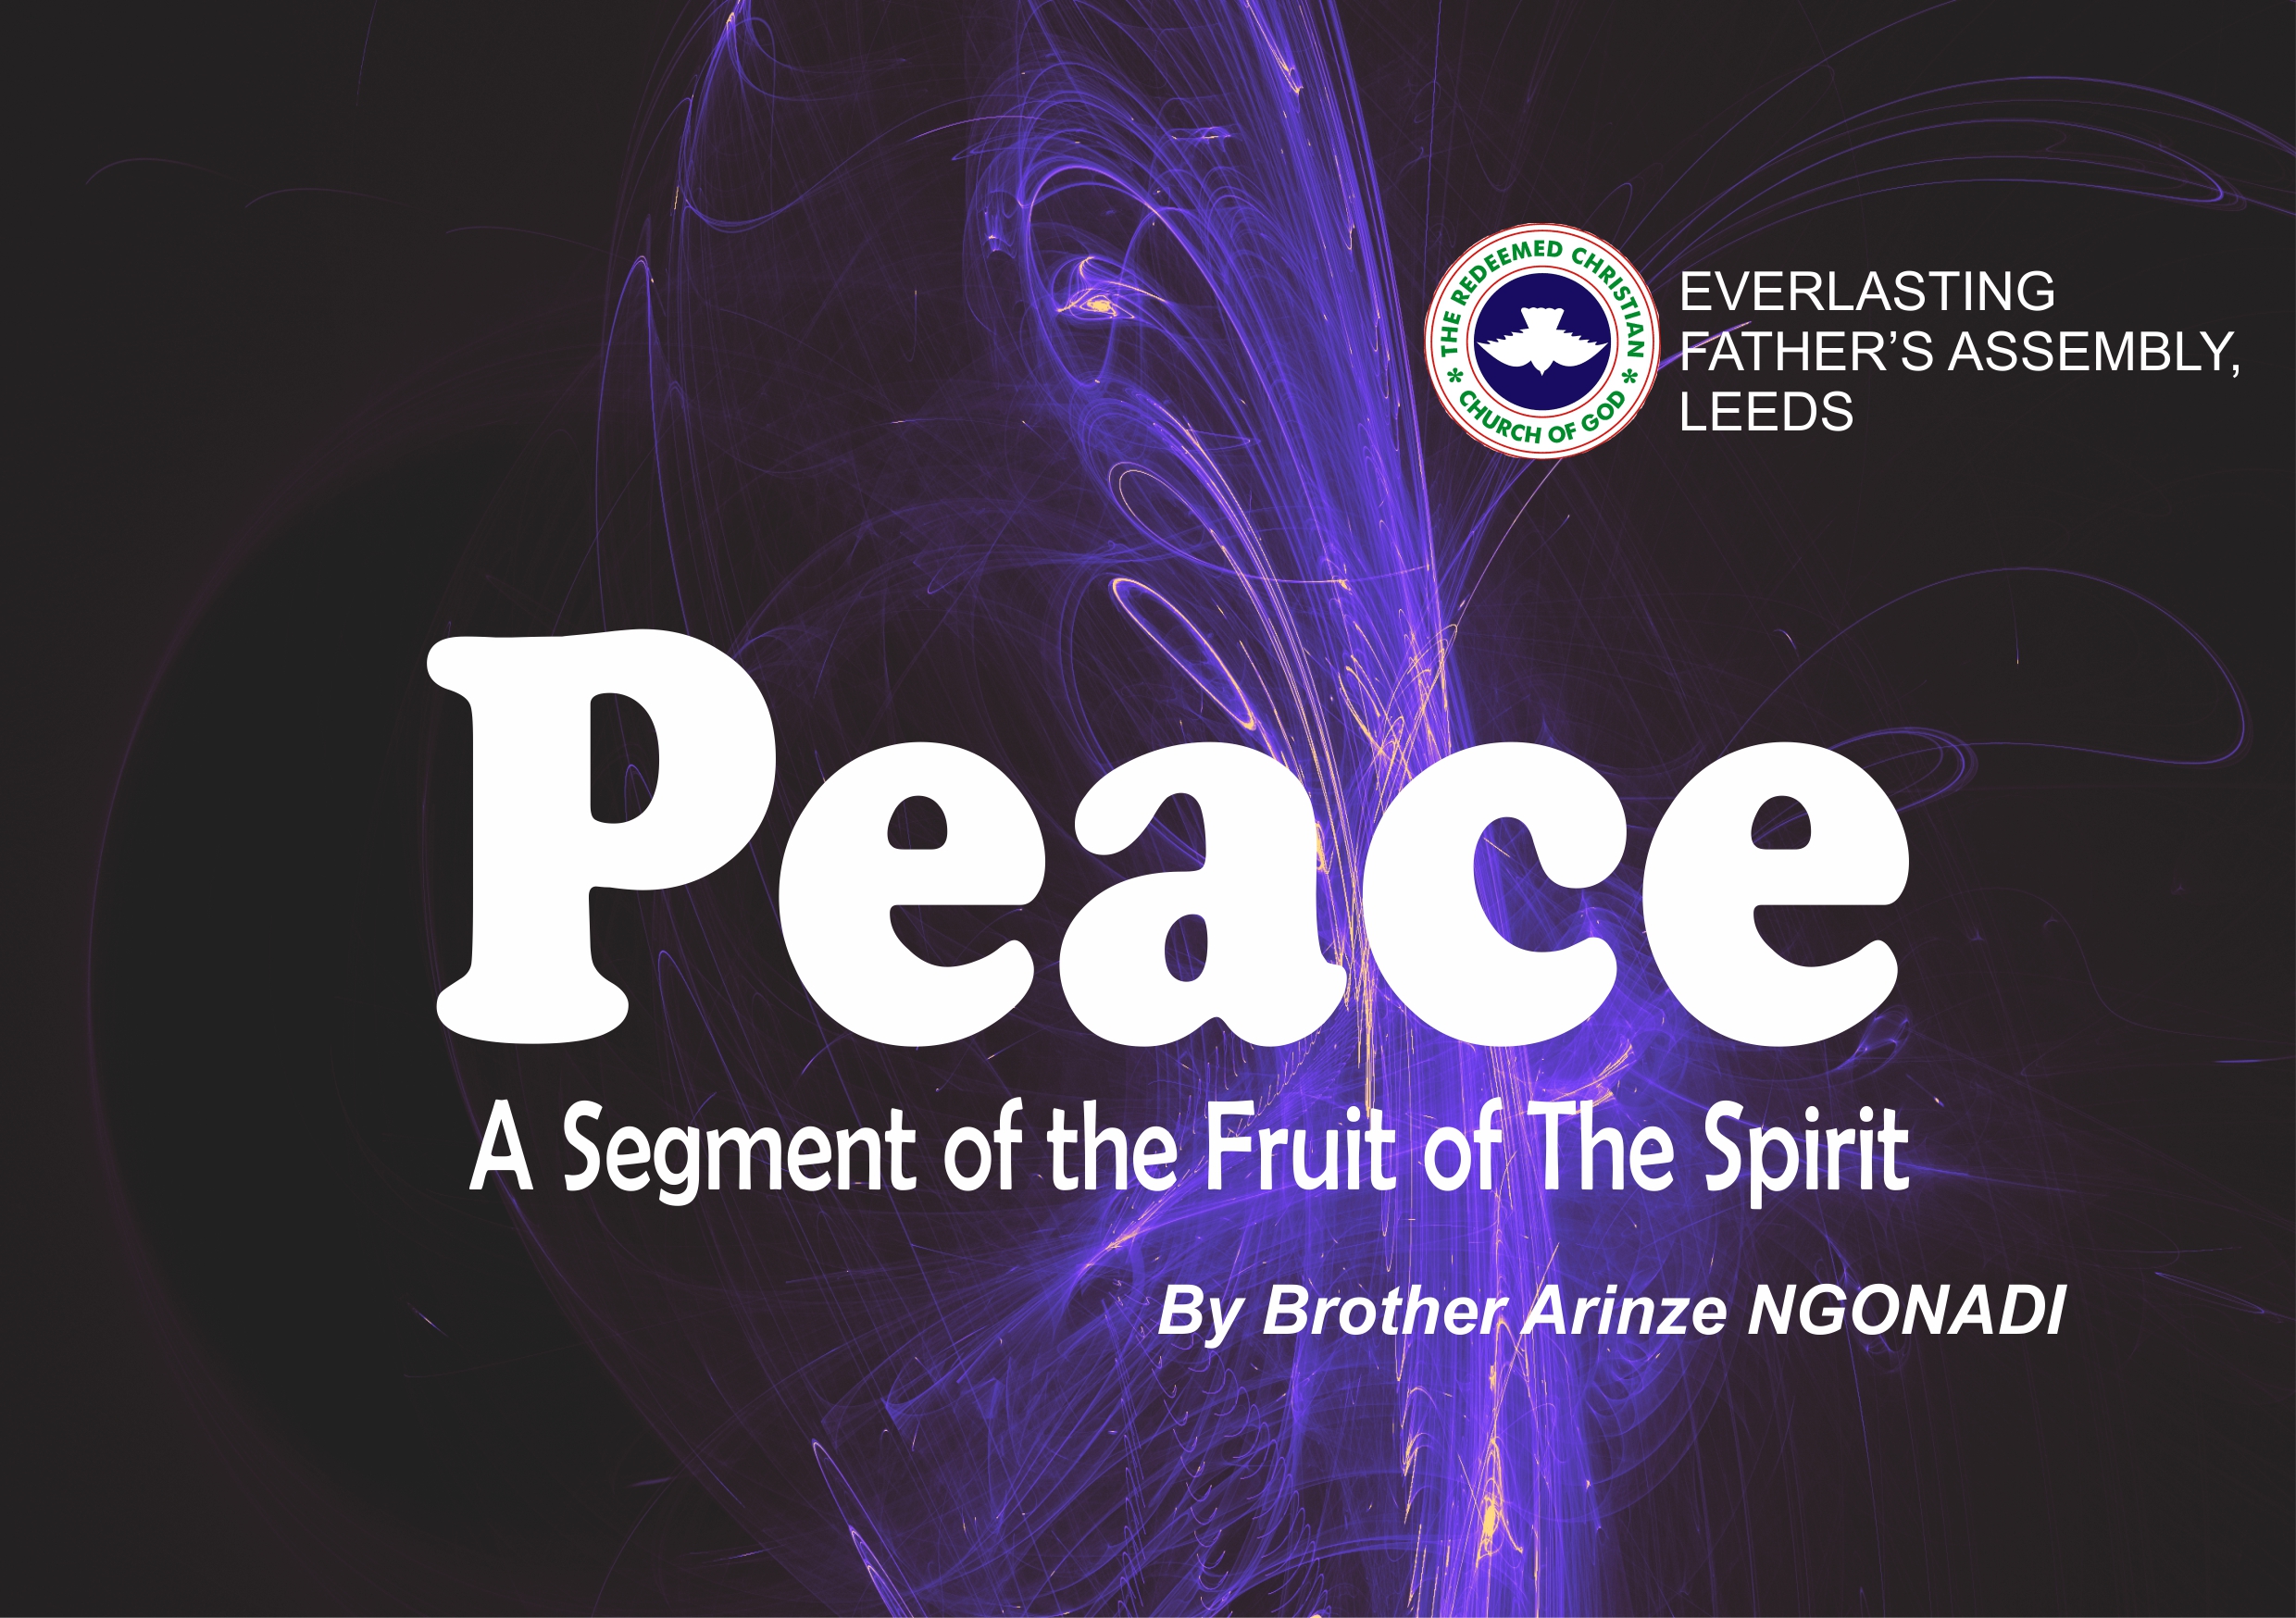 Peace – A Segment of the Fruit of The Spirit, by Brother Arinze Ngonadi